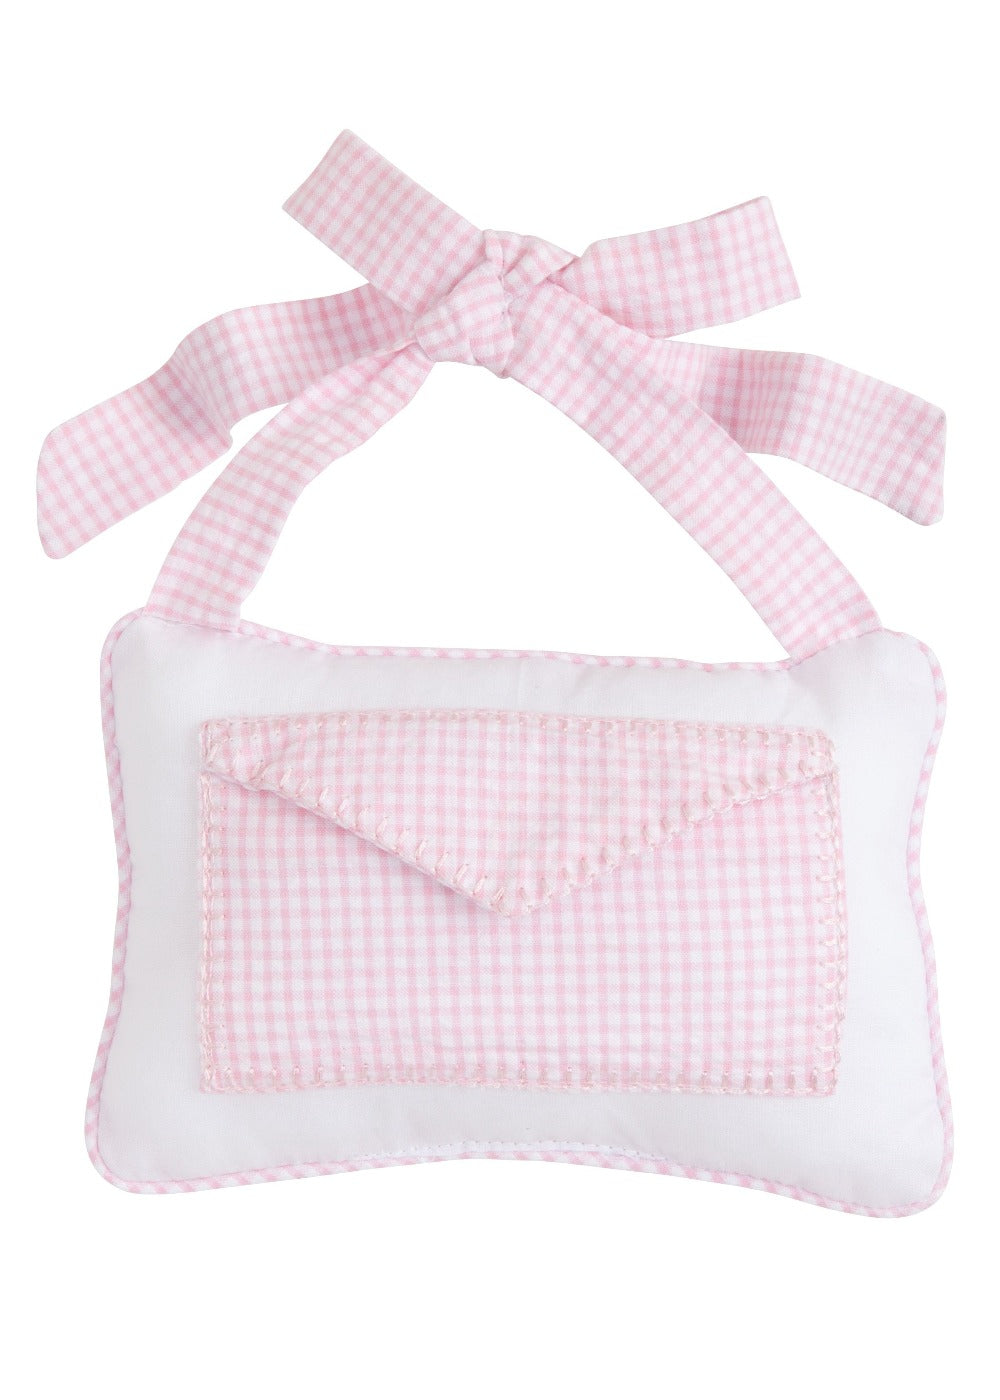 Little English gift card holder, classic door pillow with pocket in pink, baby girl gift